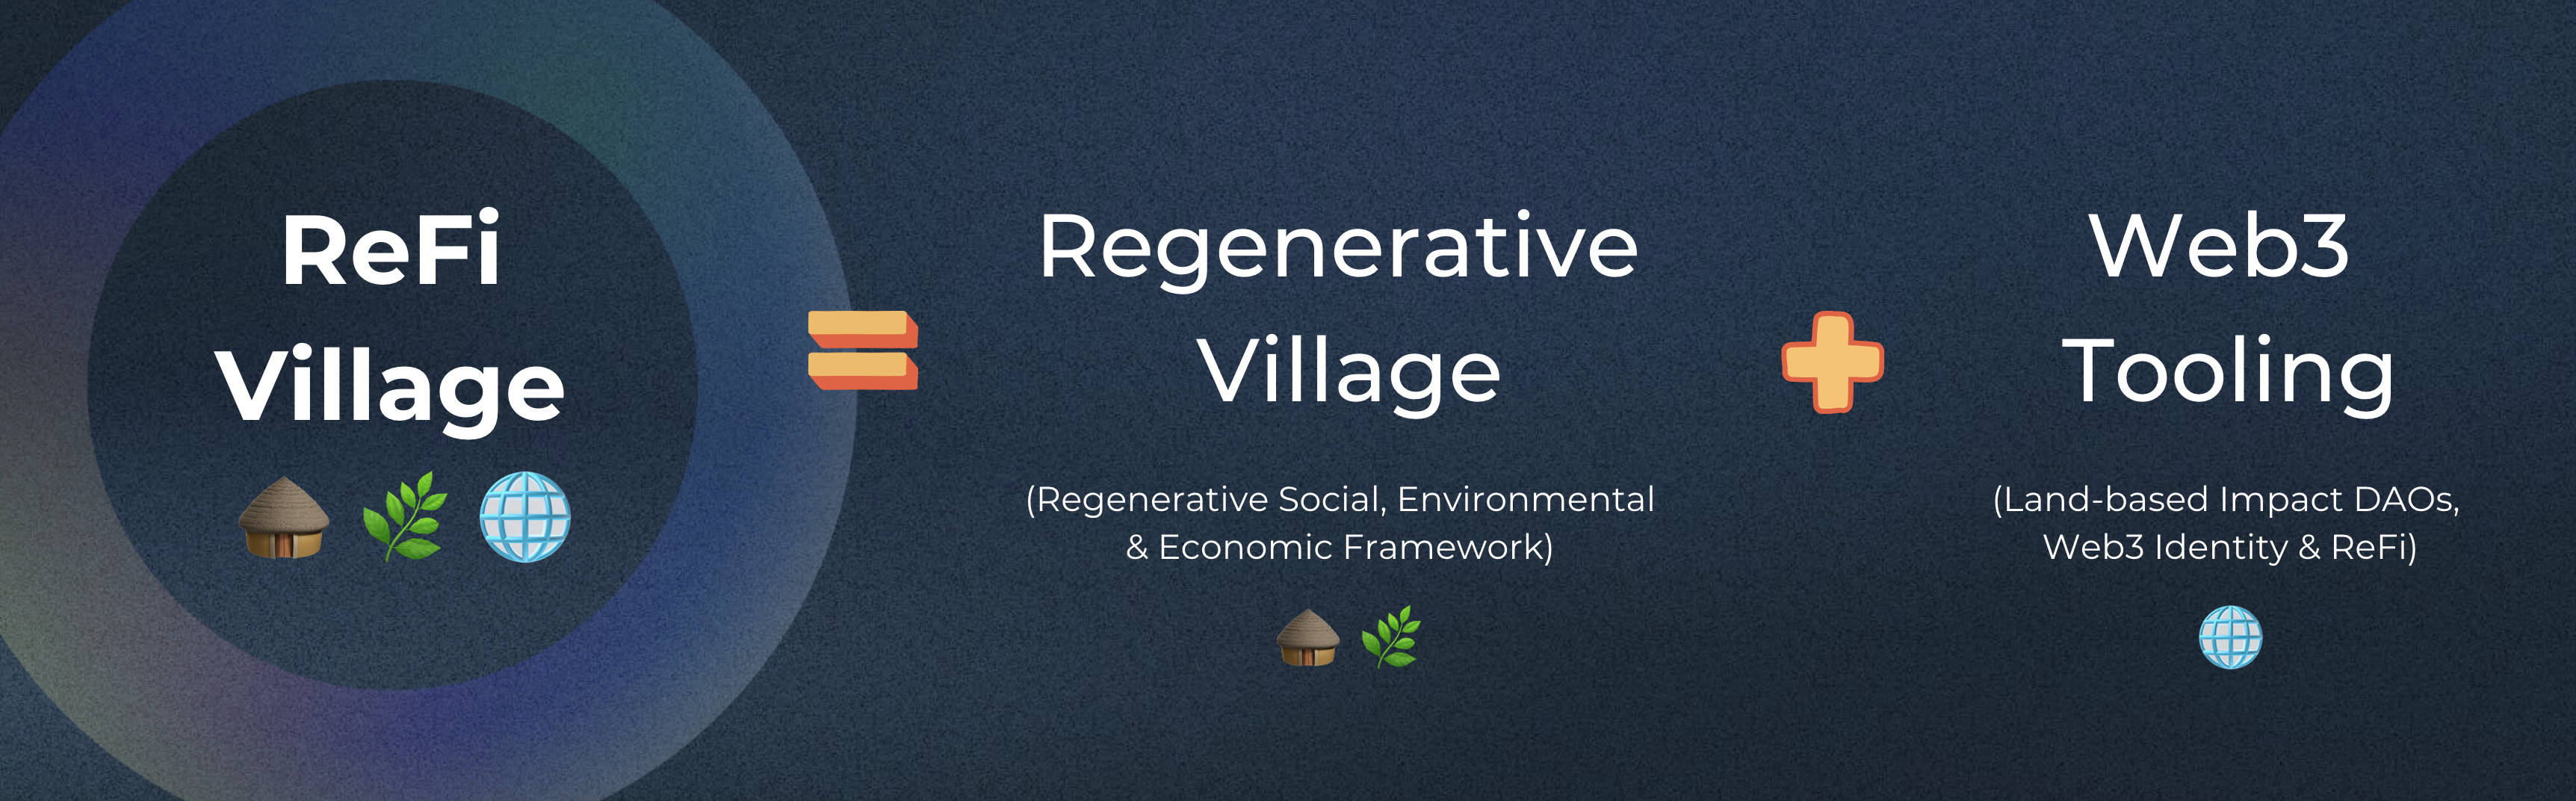 Our working definition for a ReFi Village